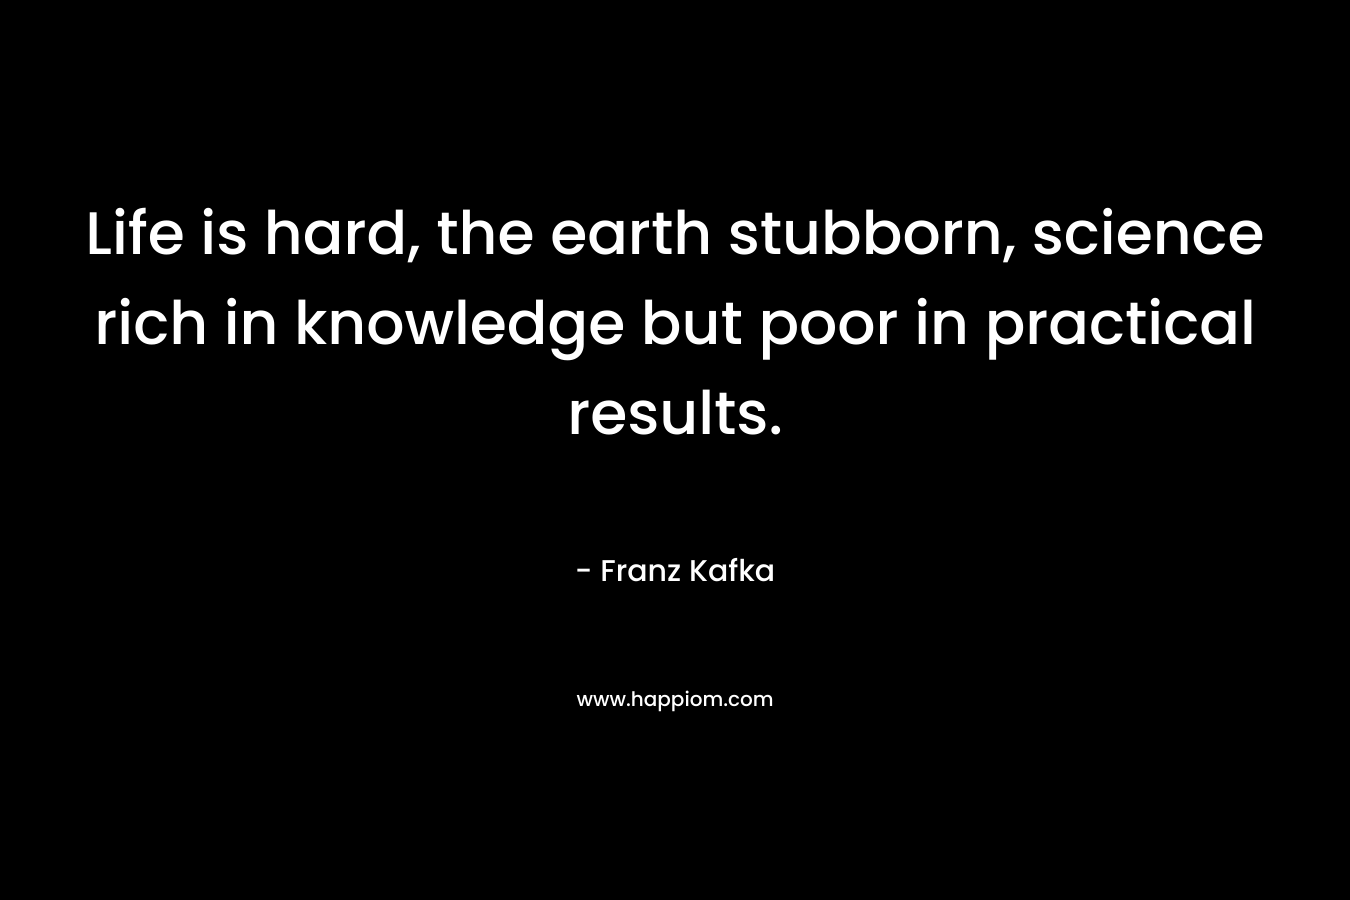 Life is hard, the earth stubborn, science rich in knowledge but poor in practical results. – Franz Kafka